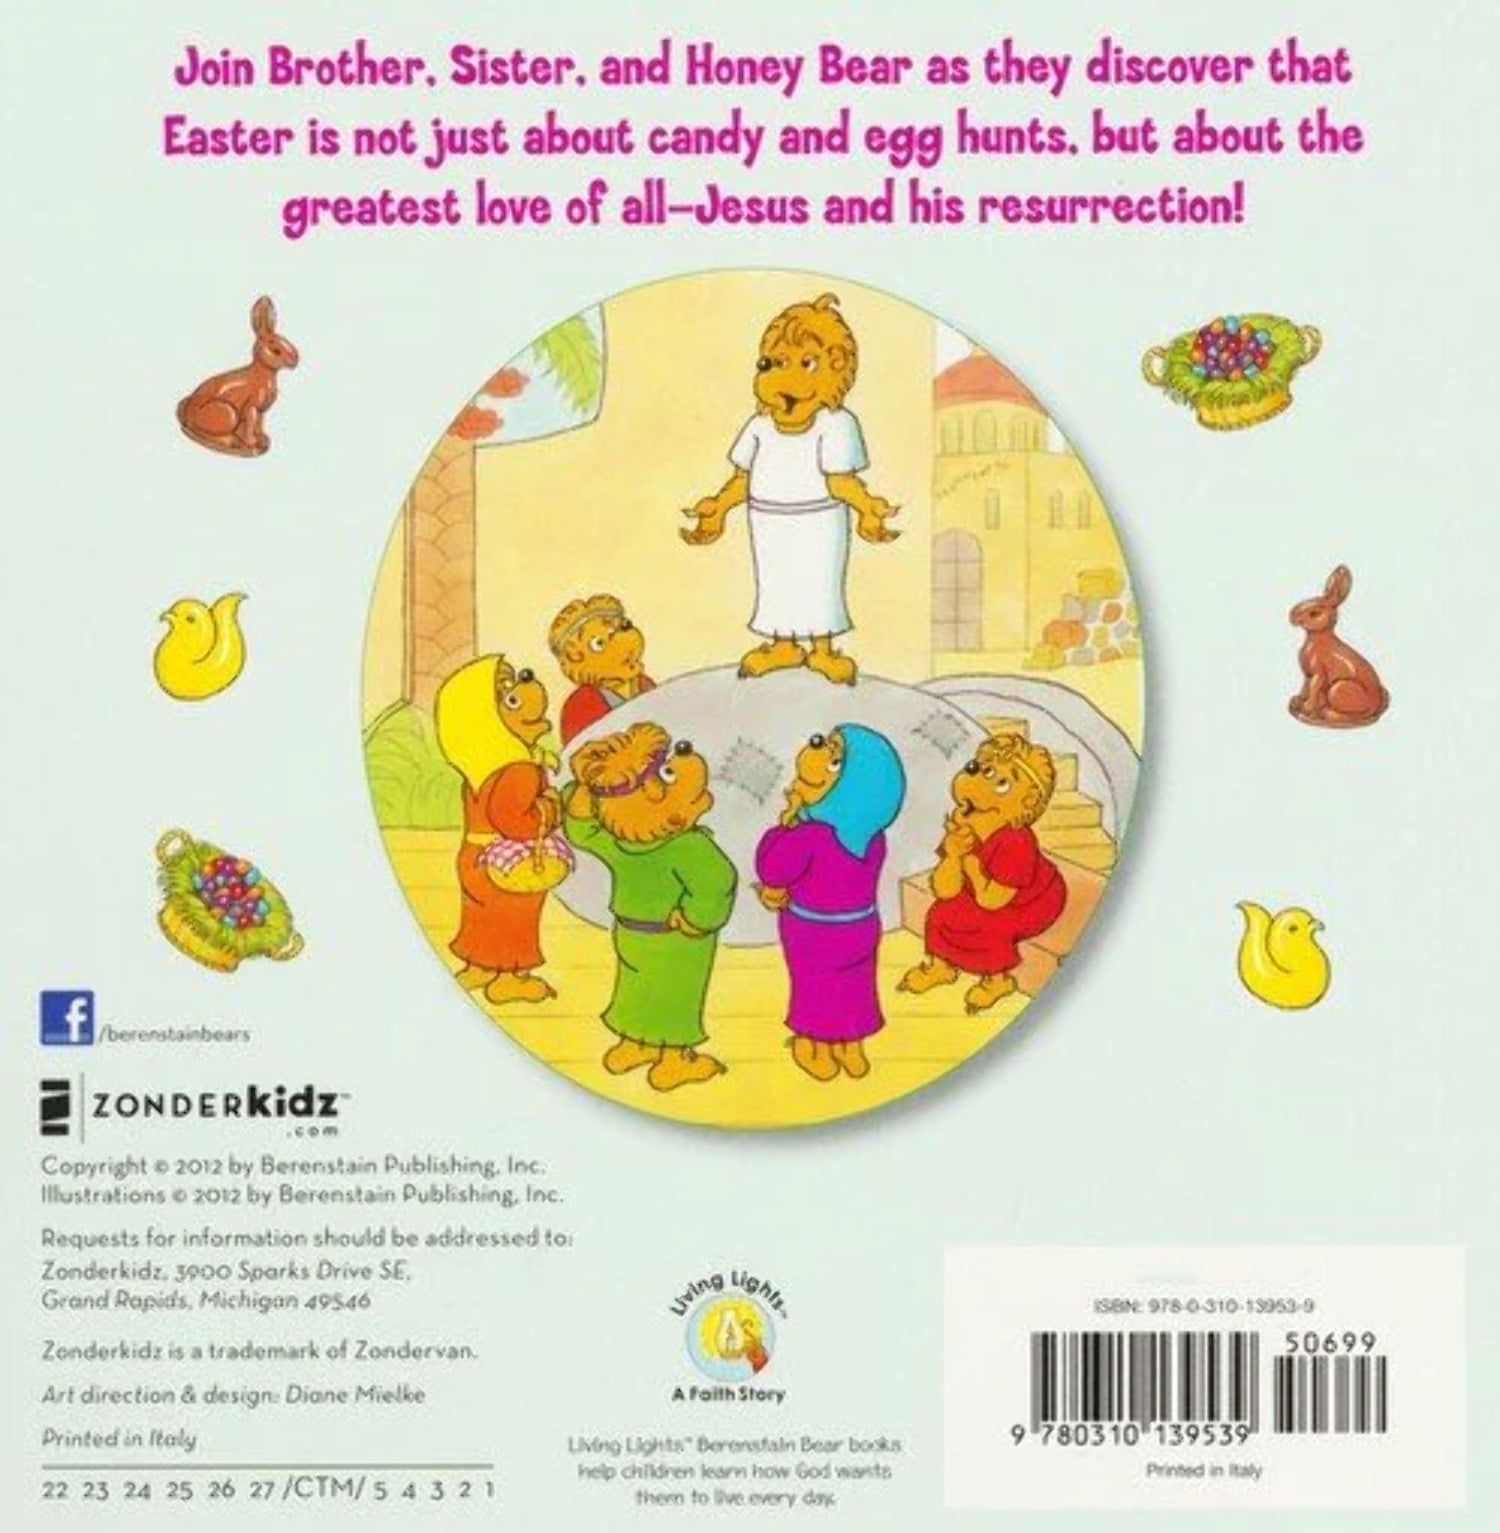 Join the Berenstain Bears as they explore the true meaning of